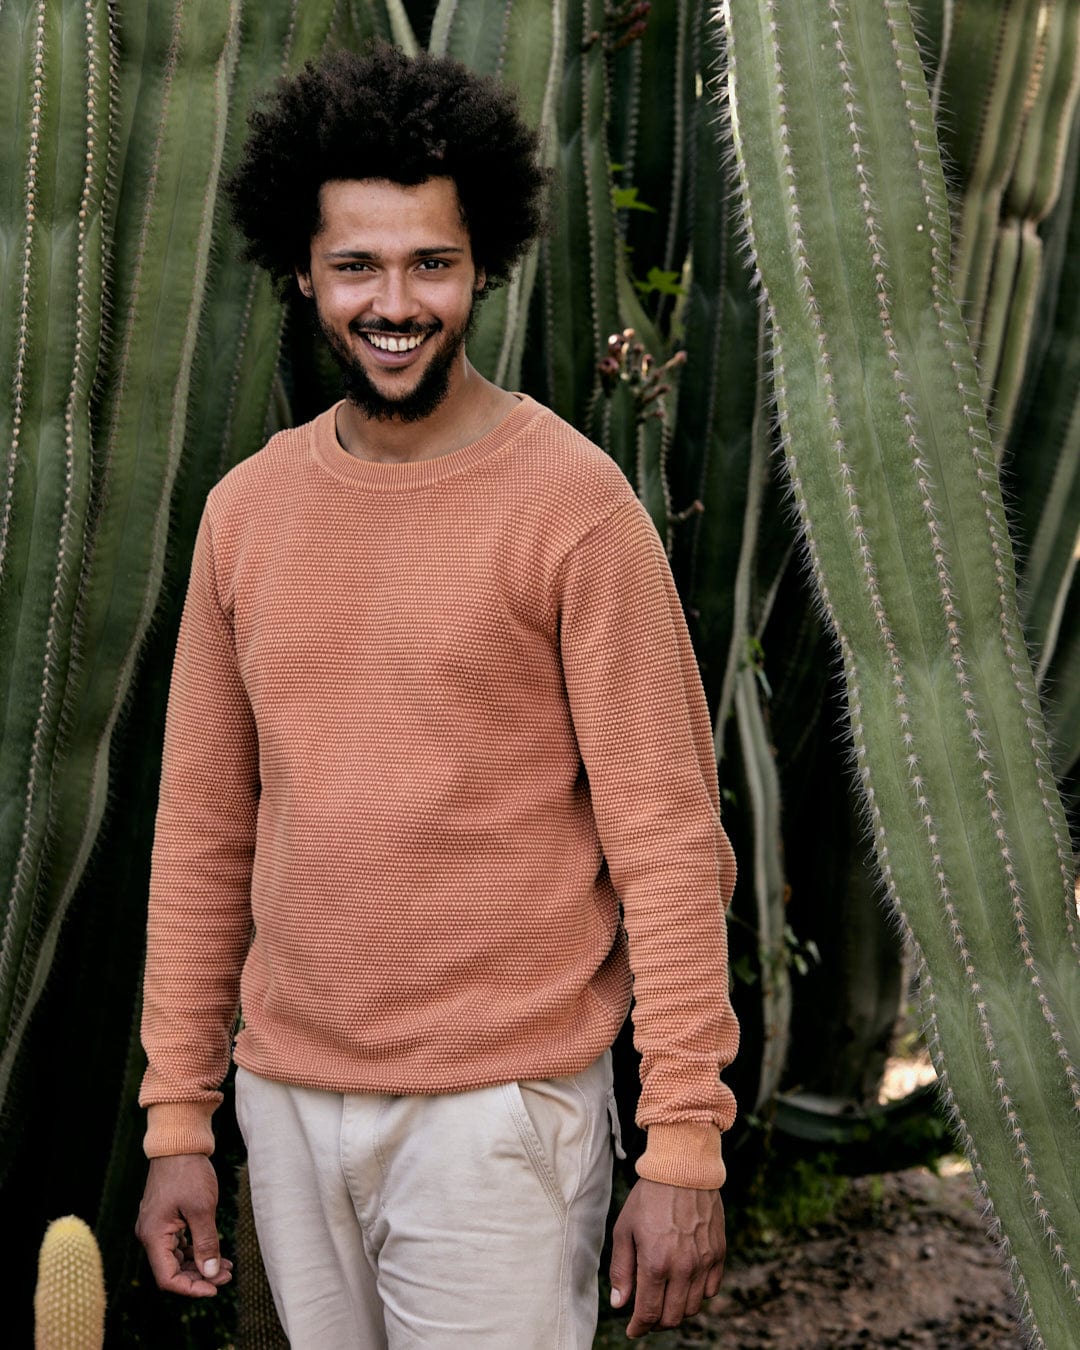 A smiling man with an afro wearing a Saltrock Moss - Mens Washed Knitted Crew in Orange stands in front of tall cactus plants.